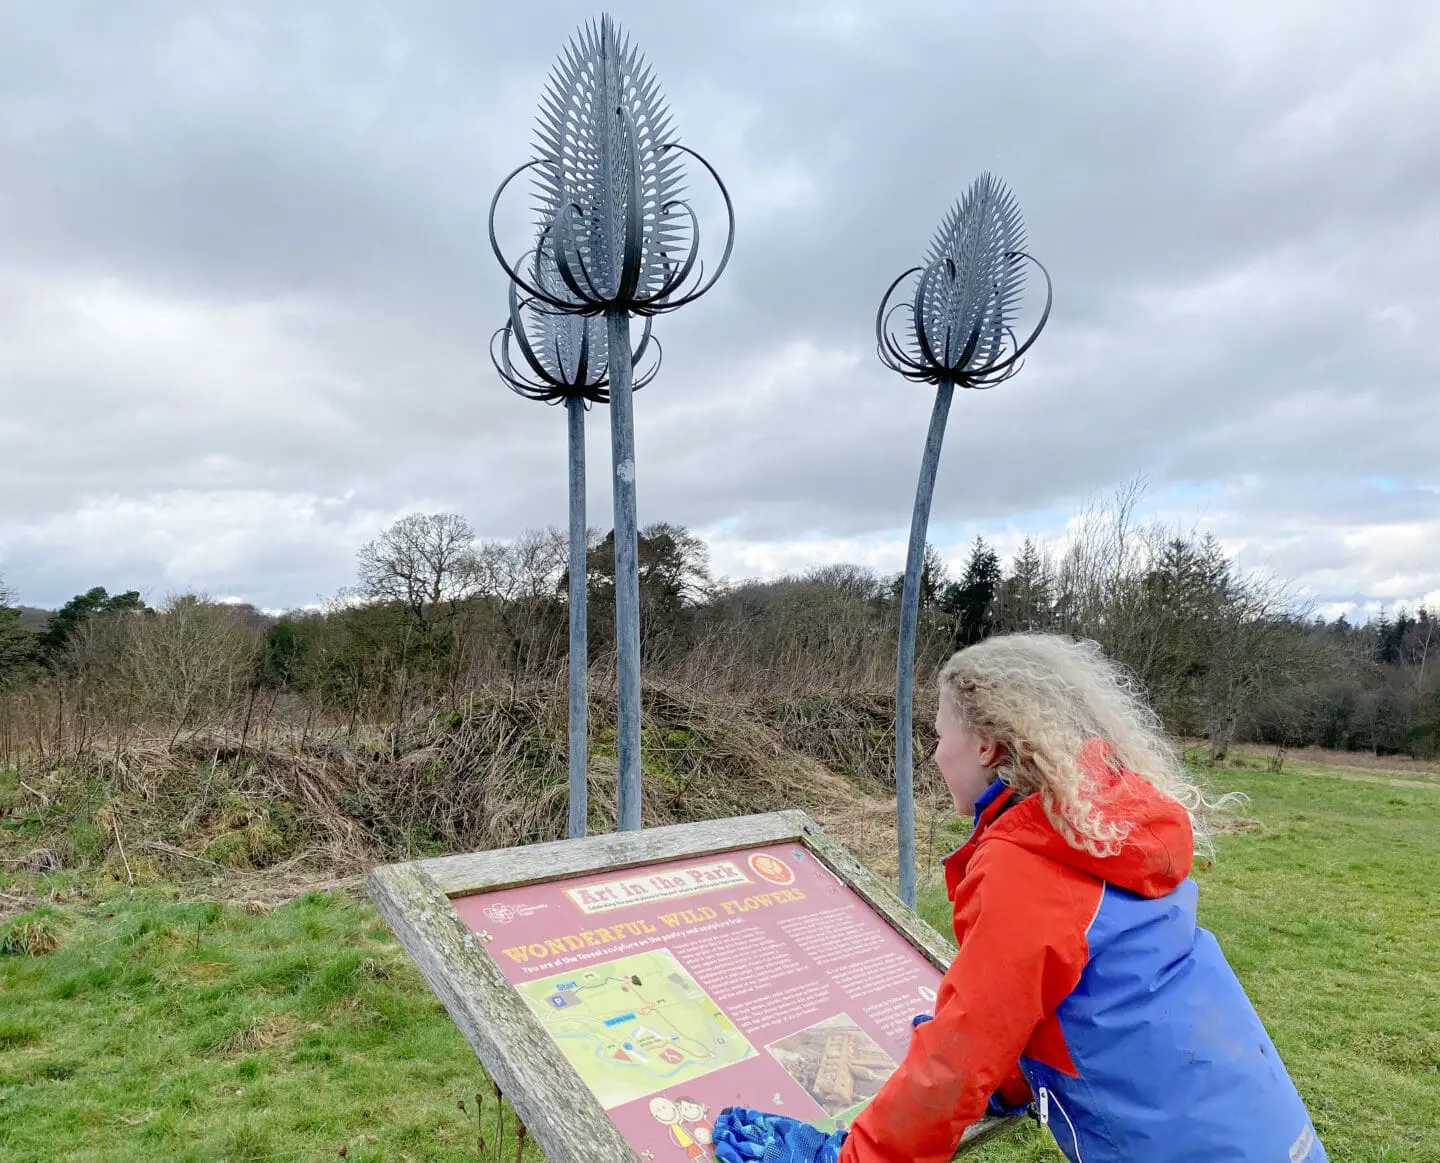 Child looking at sign beside teasel sculpture